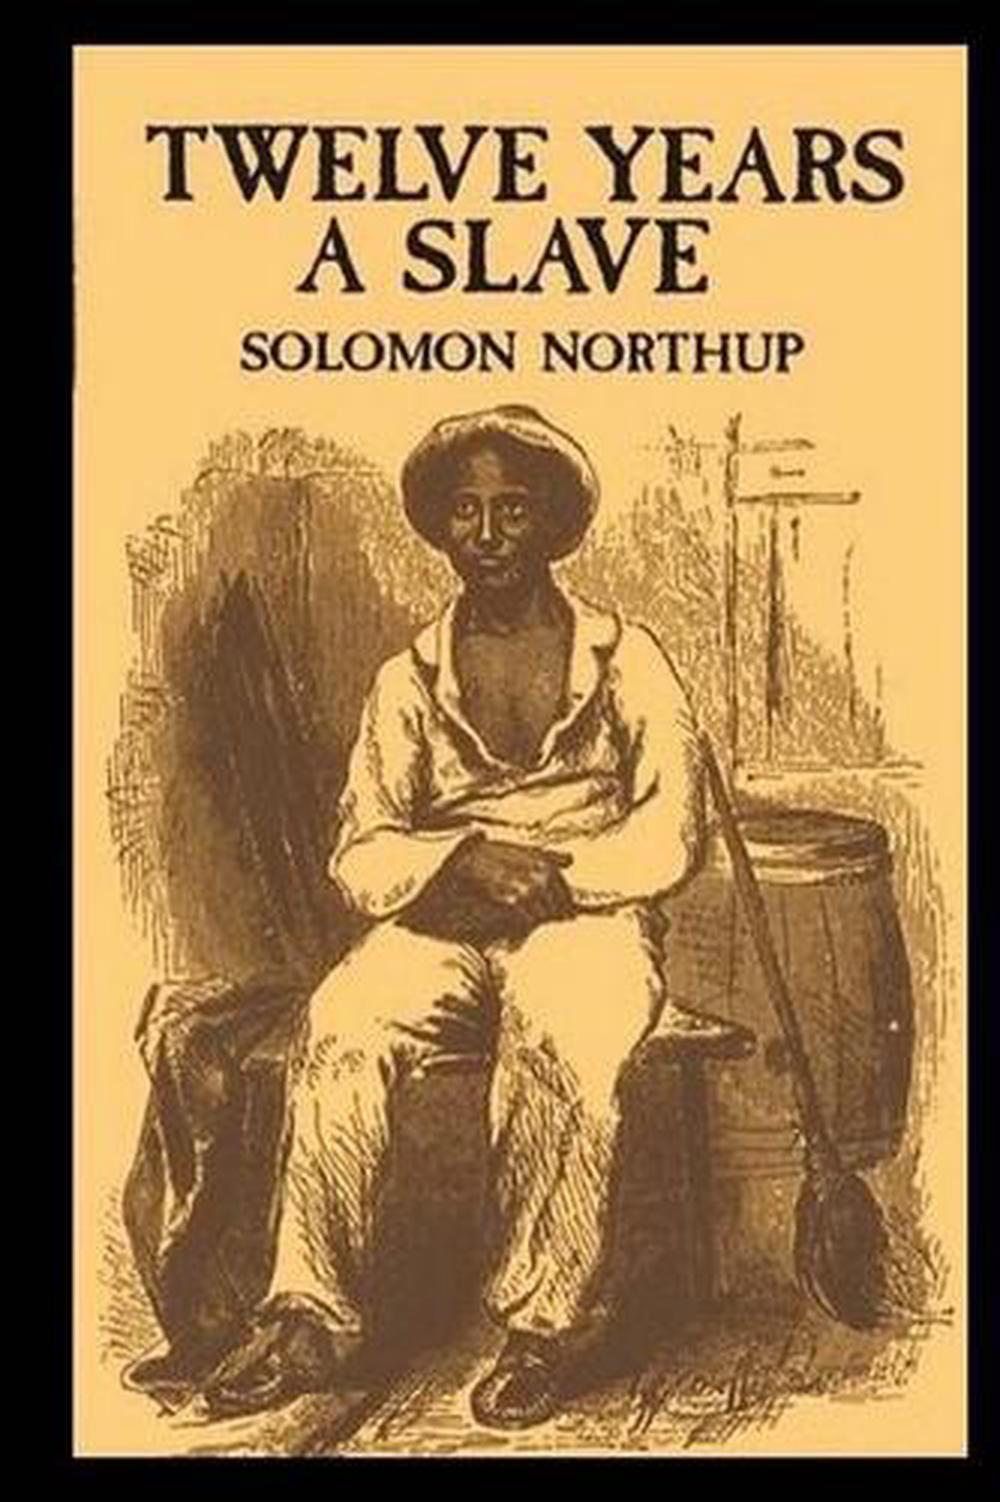 12 years a slave by solomon northup